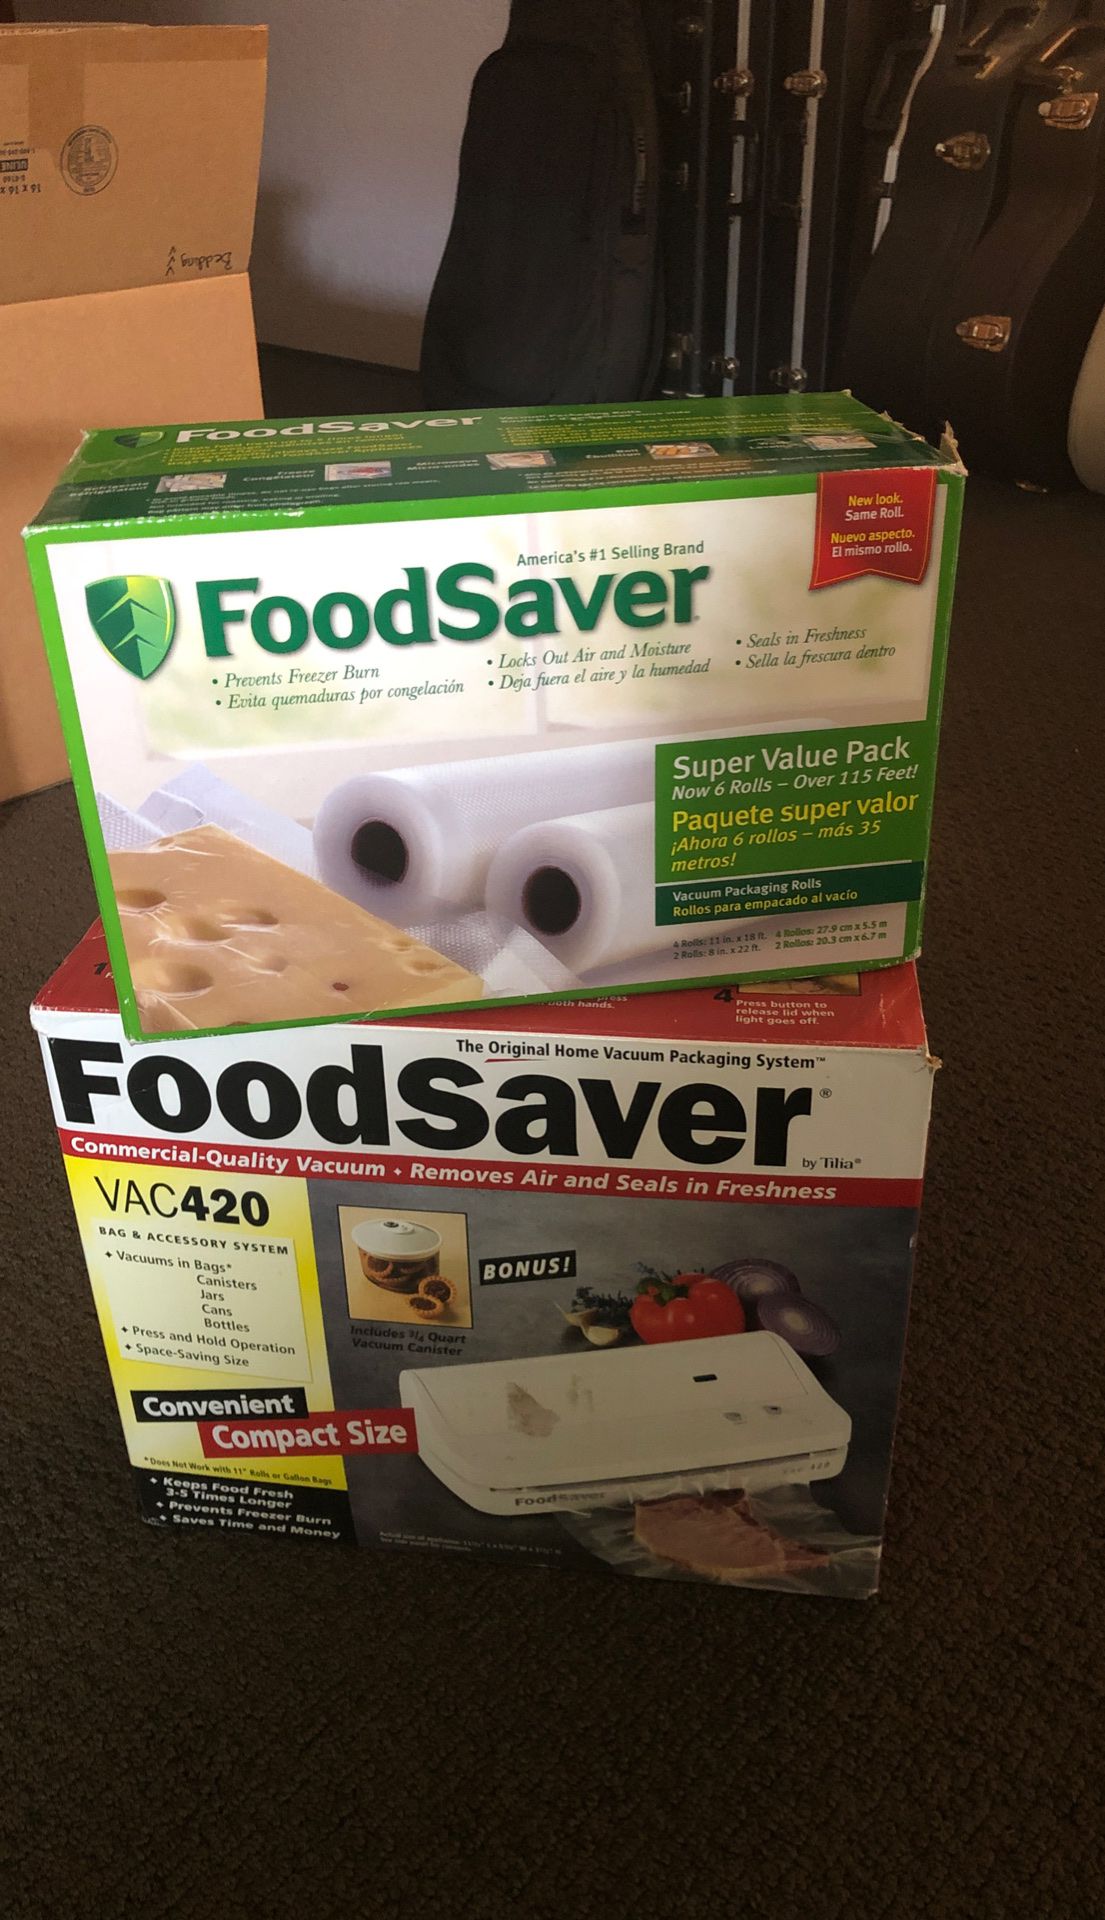 Food saver VAC420 with extra roller pack